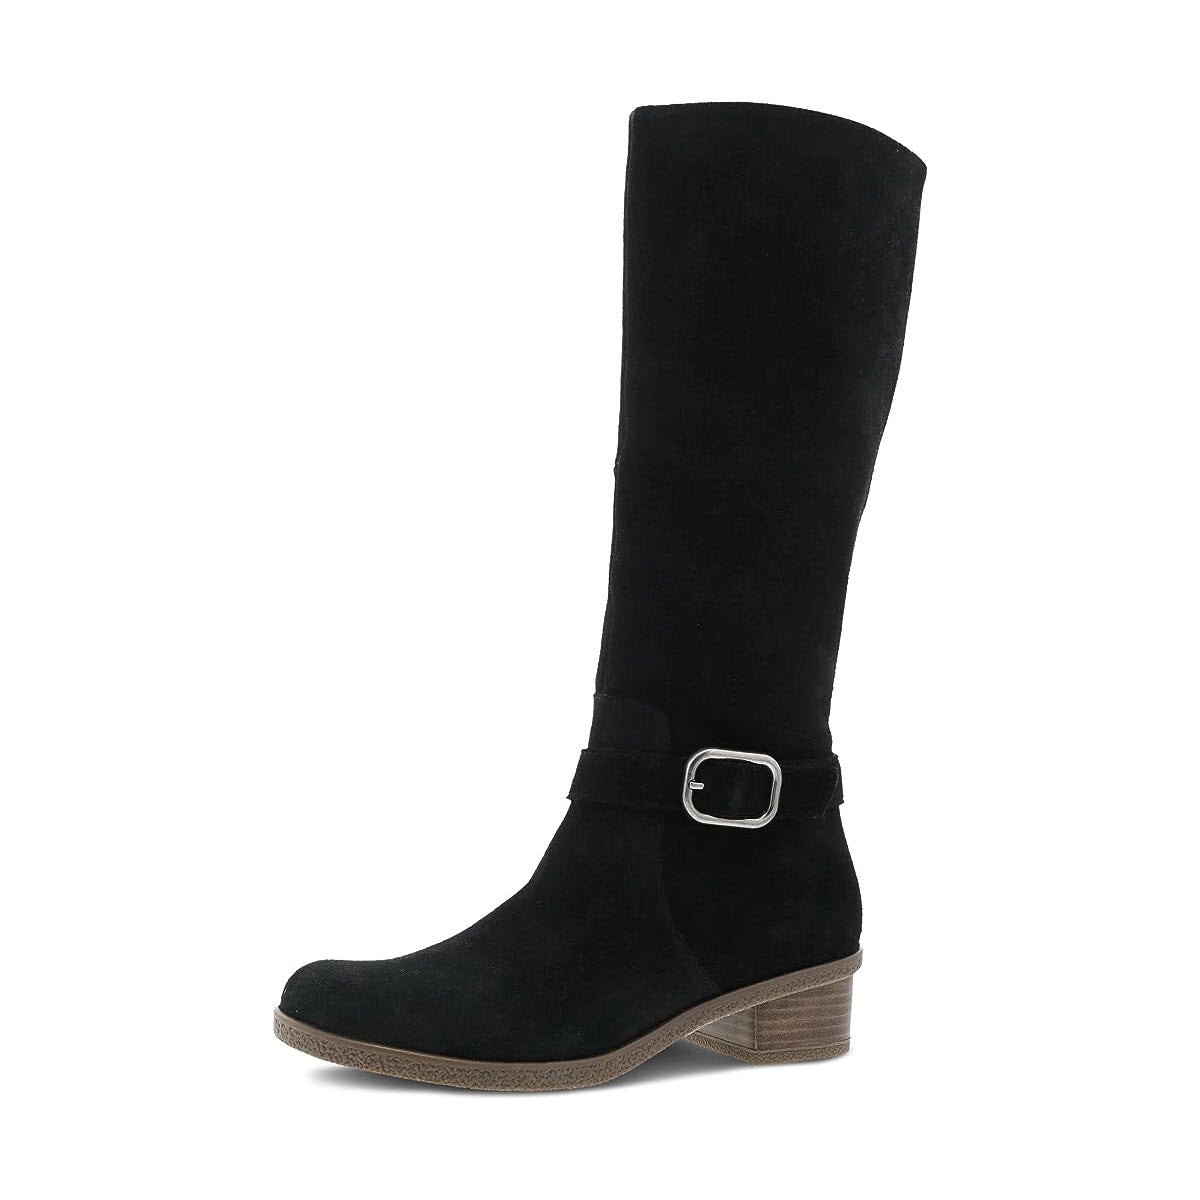 A Dansko Dalinda black suede knee-high boot with a small heel and a silver buckle detail, crafted from waterproof leathers, isolated on a white background.